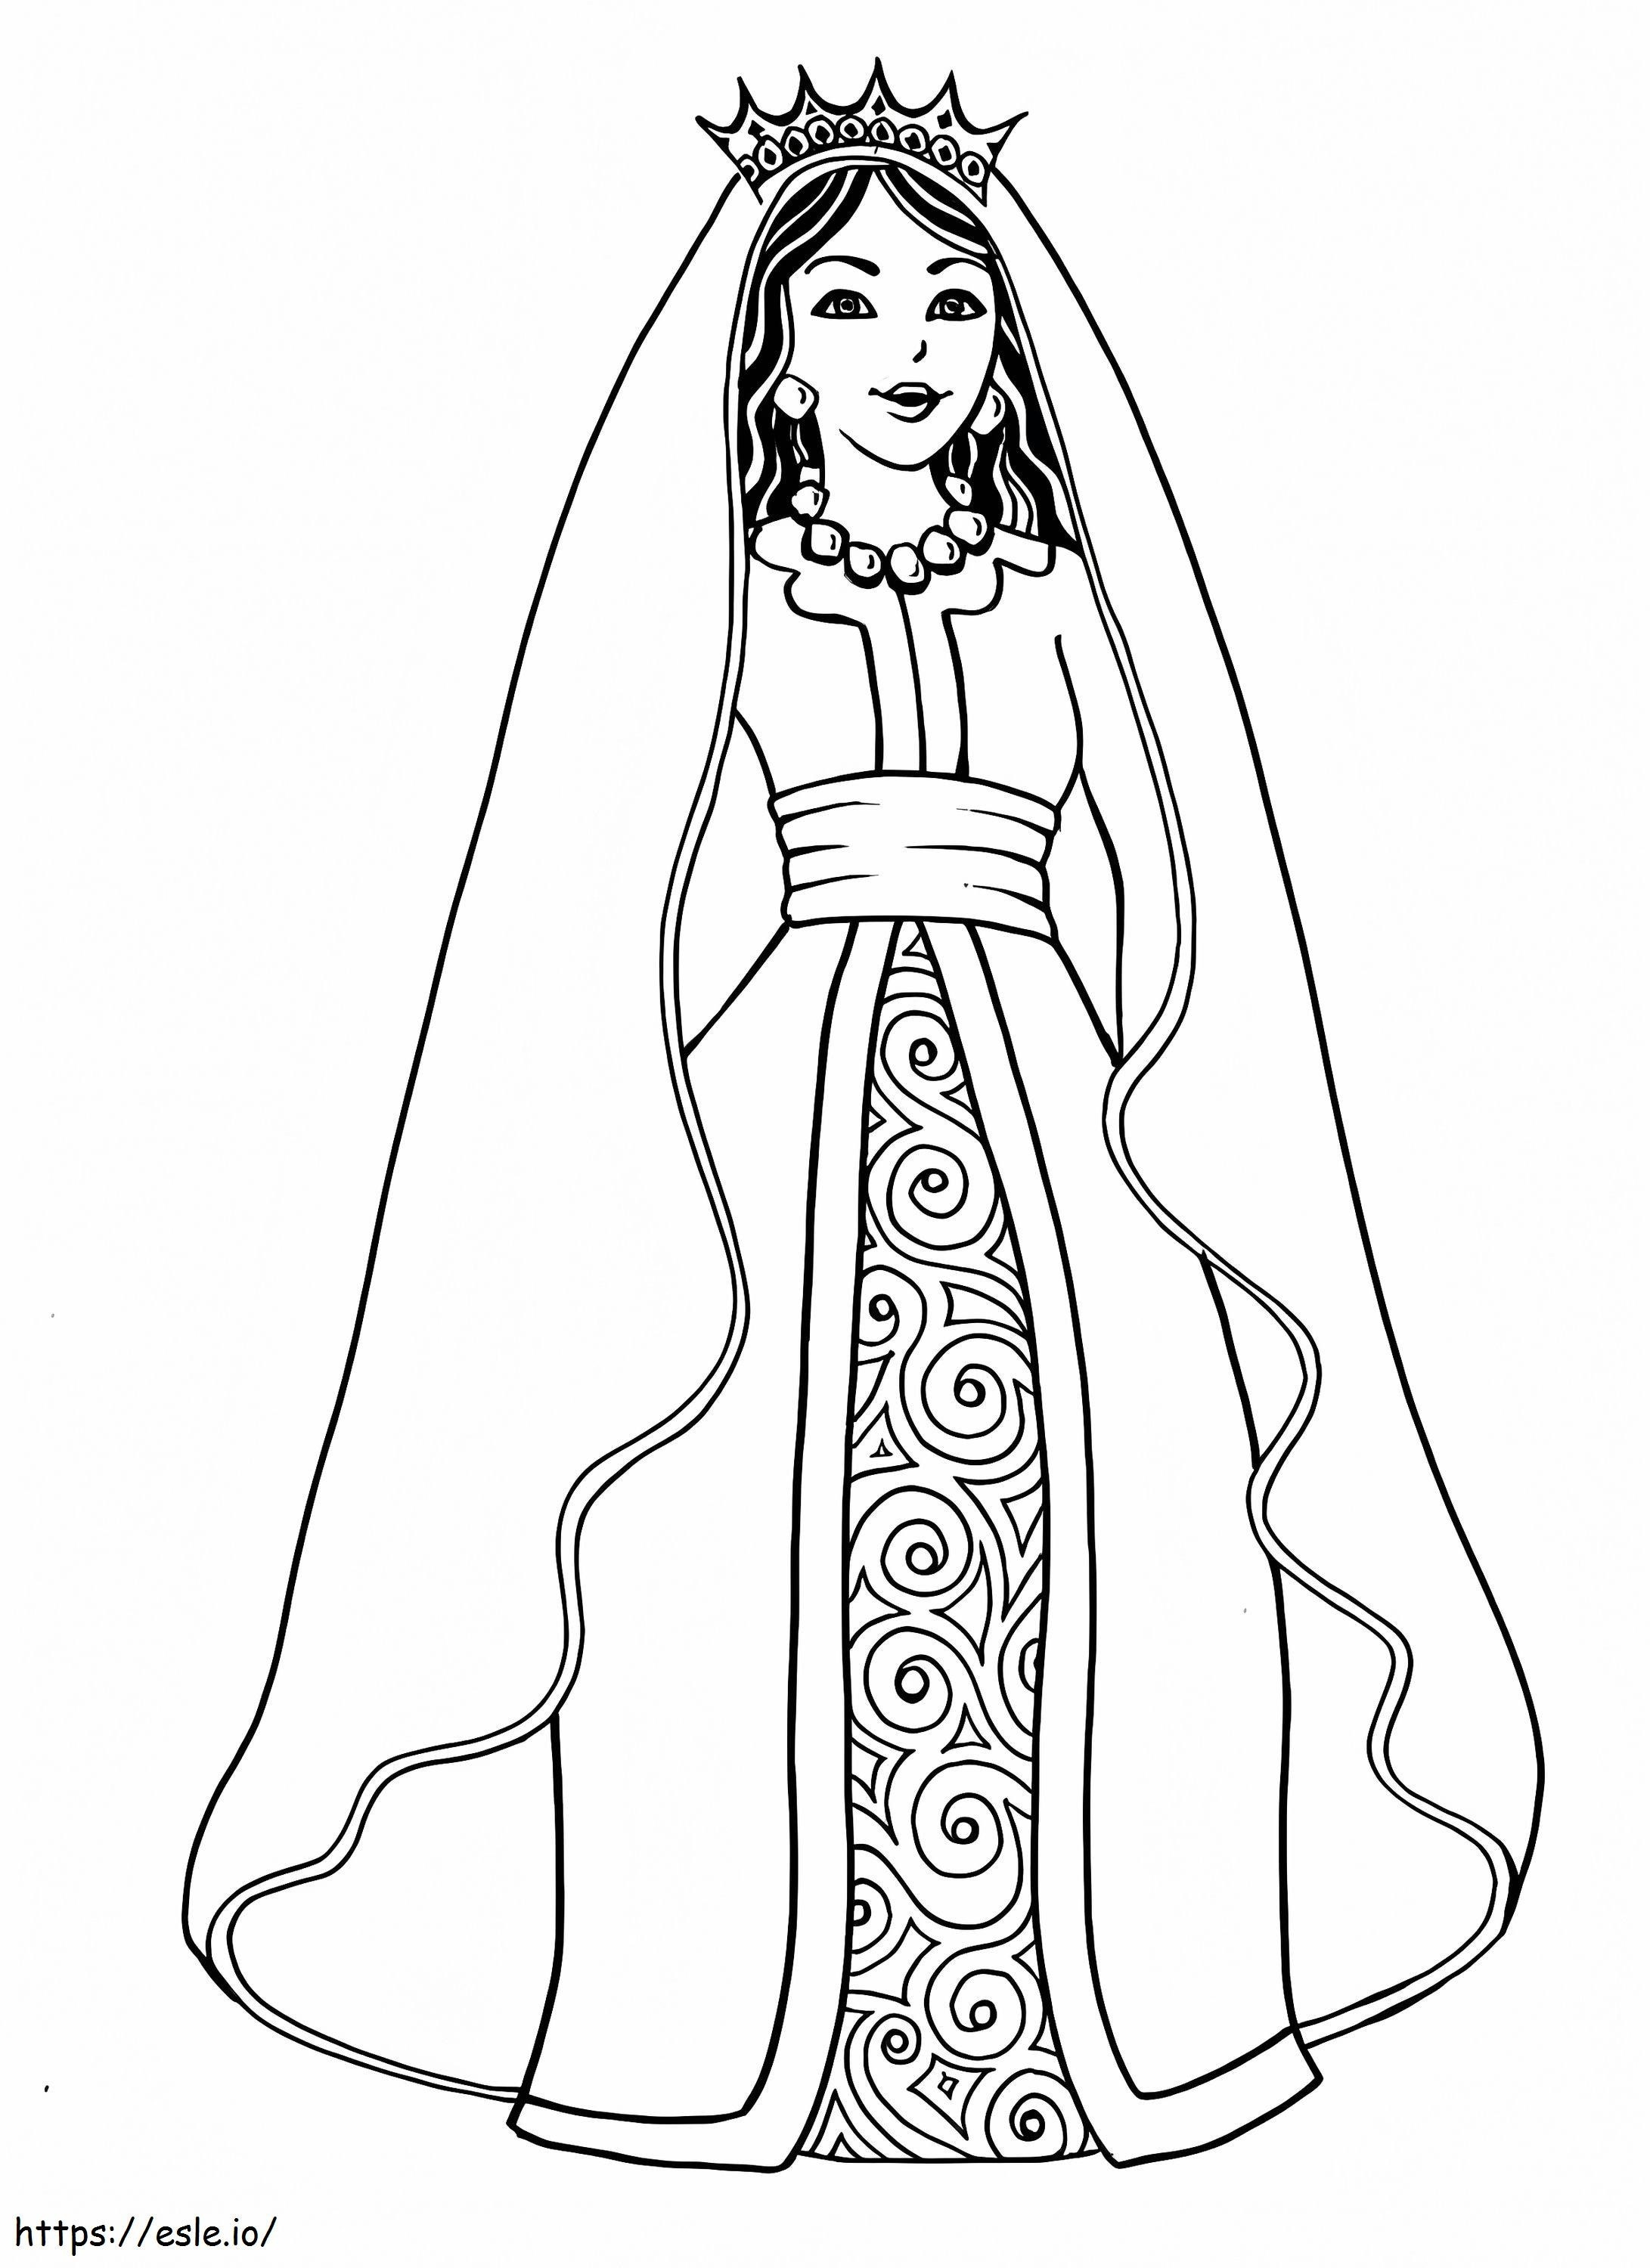 Printable Queen Esther coloring page